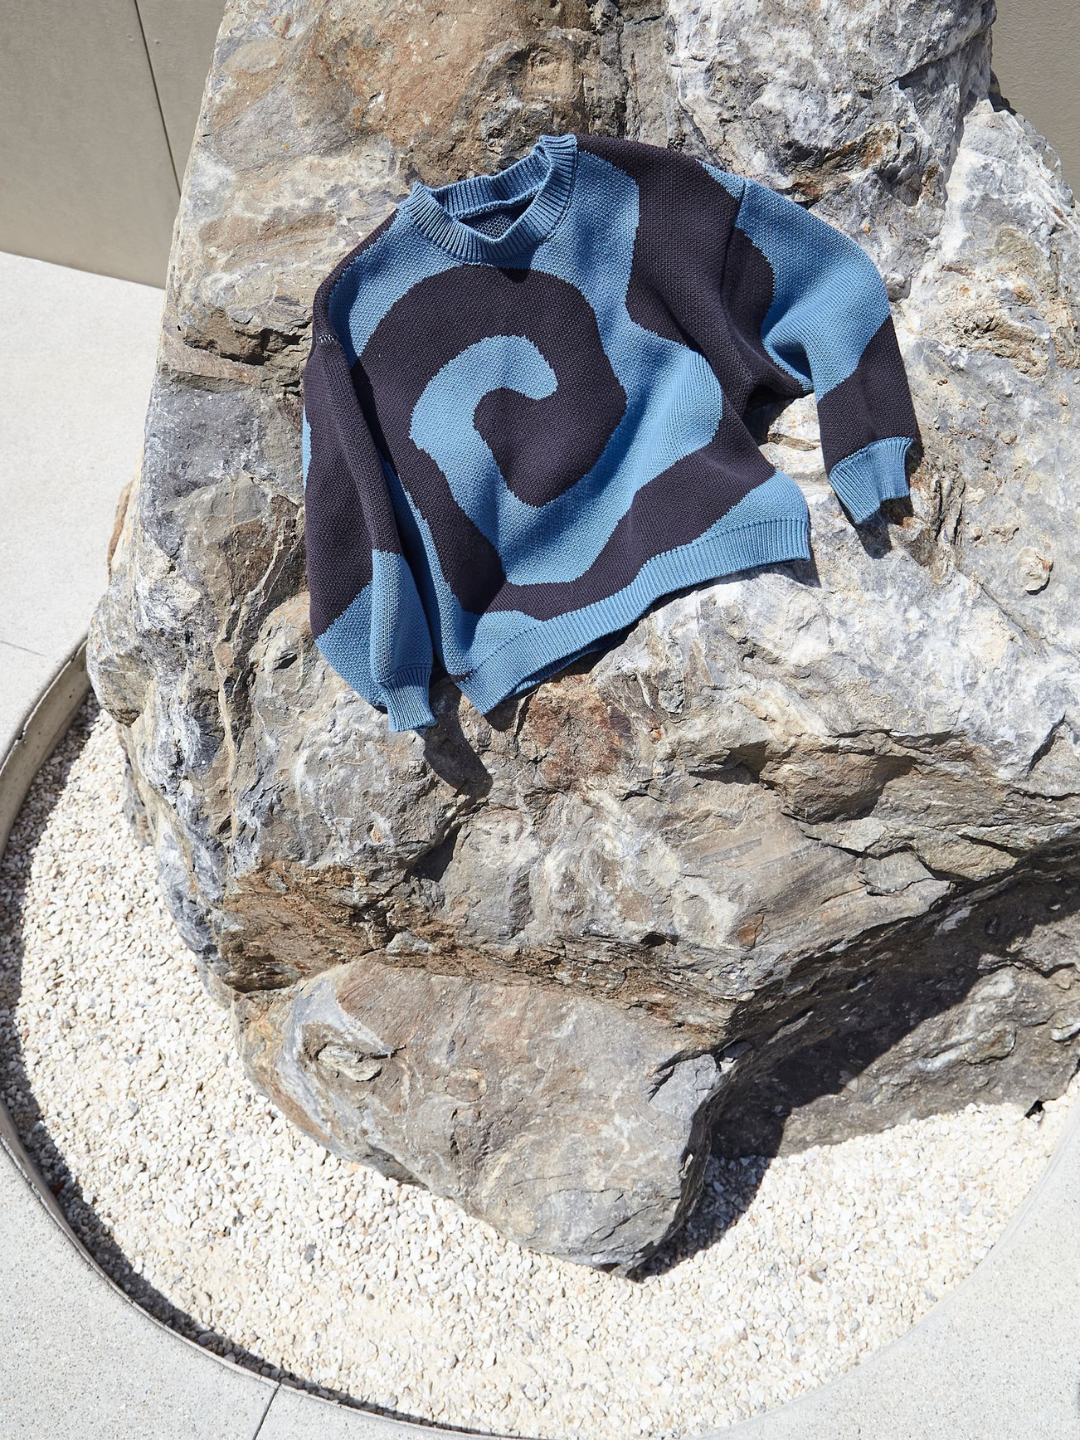 A kids crewneck sweater in medium blue, with a large single charcoal grey swirl design that covers the entire sweater, shown lying on a rock in a paved courtyard.